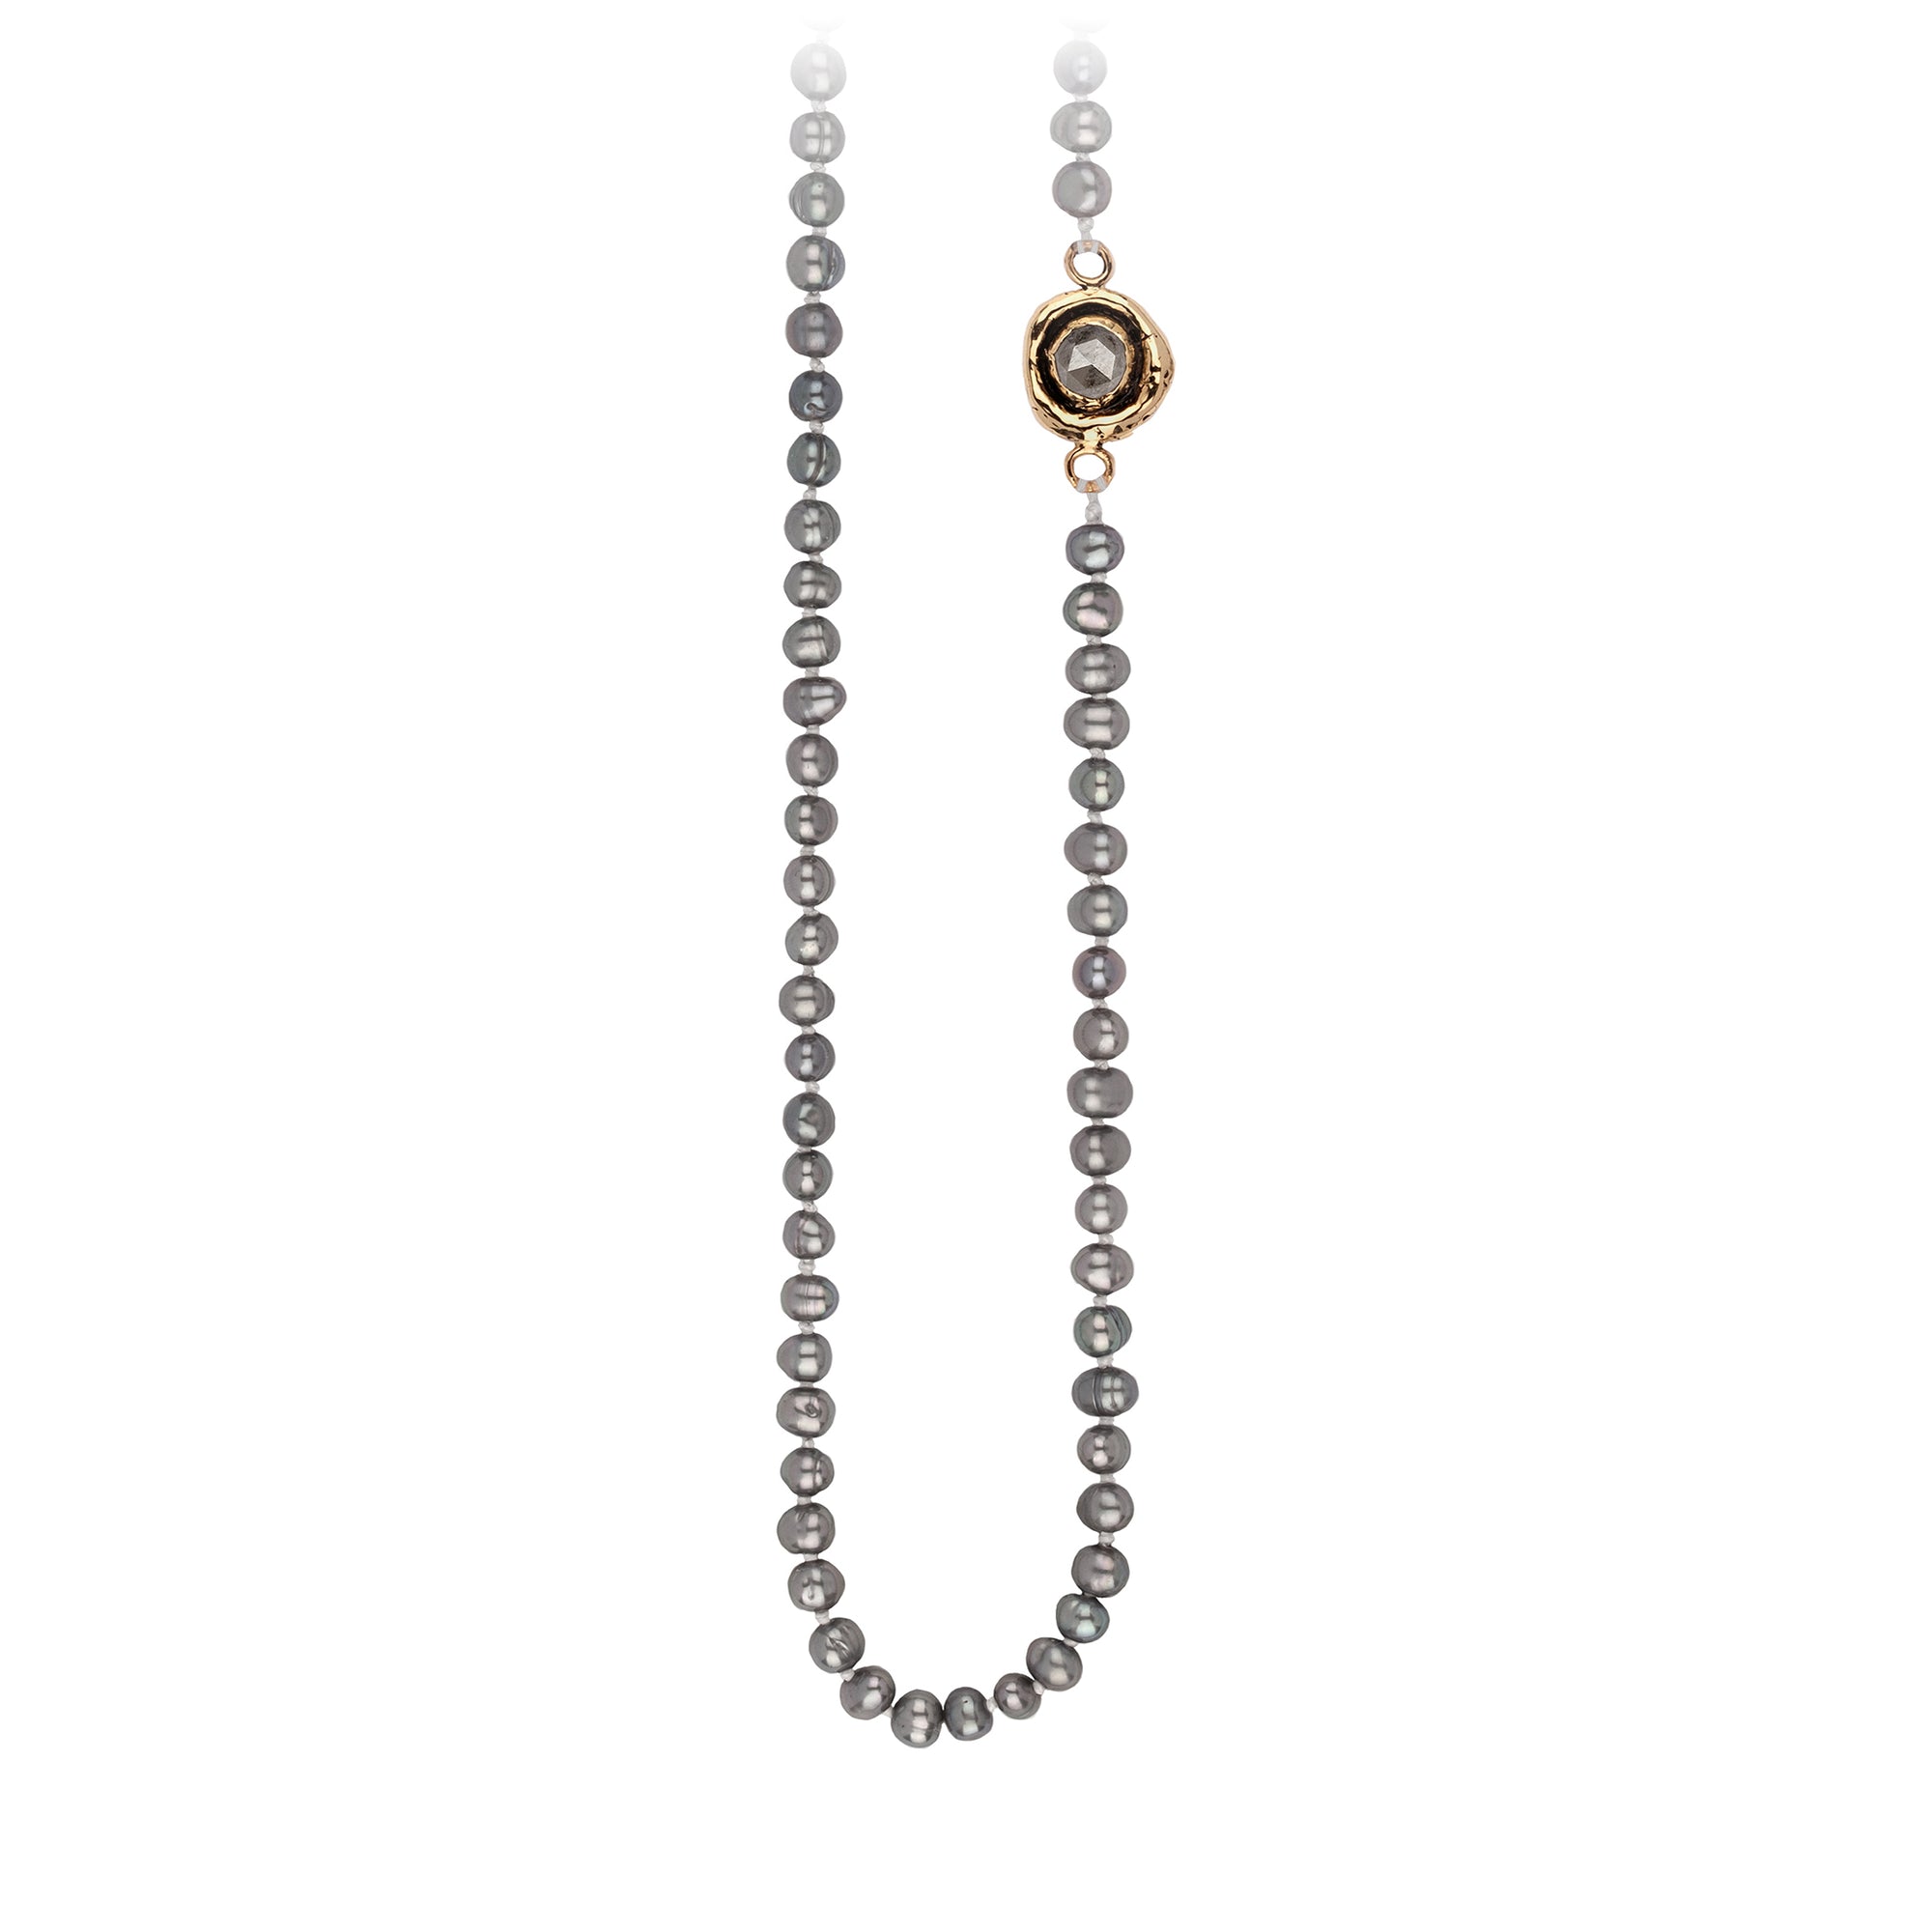 A necklace of hand strung dove grey pearls with a 14k gold bezel set grey diamond.